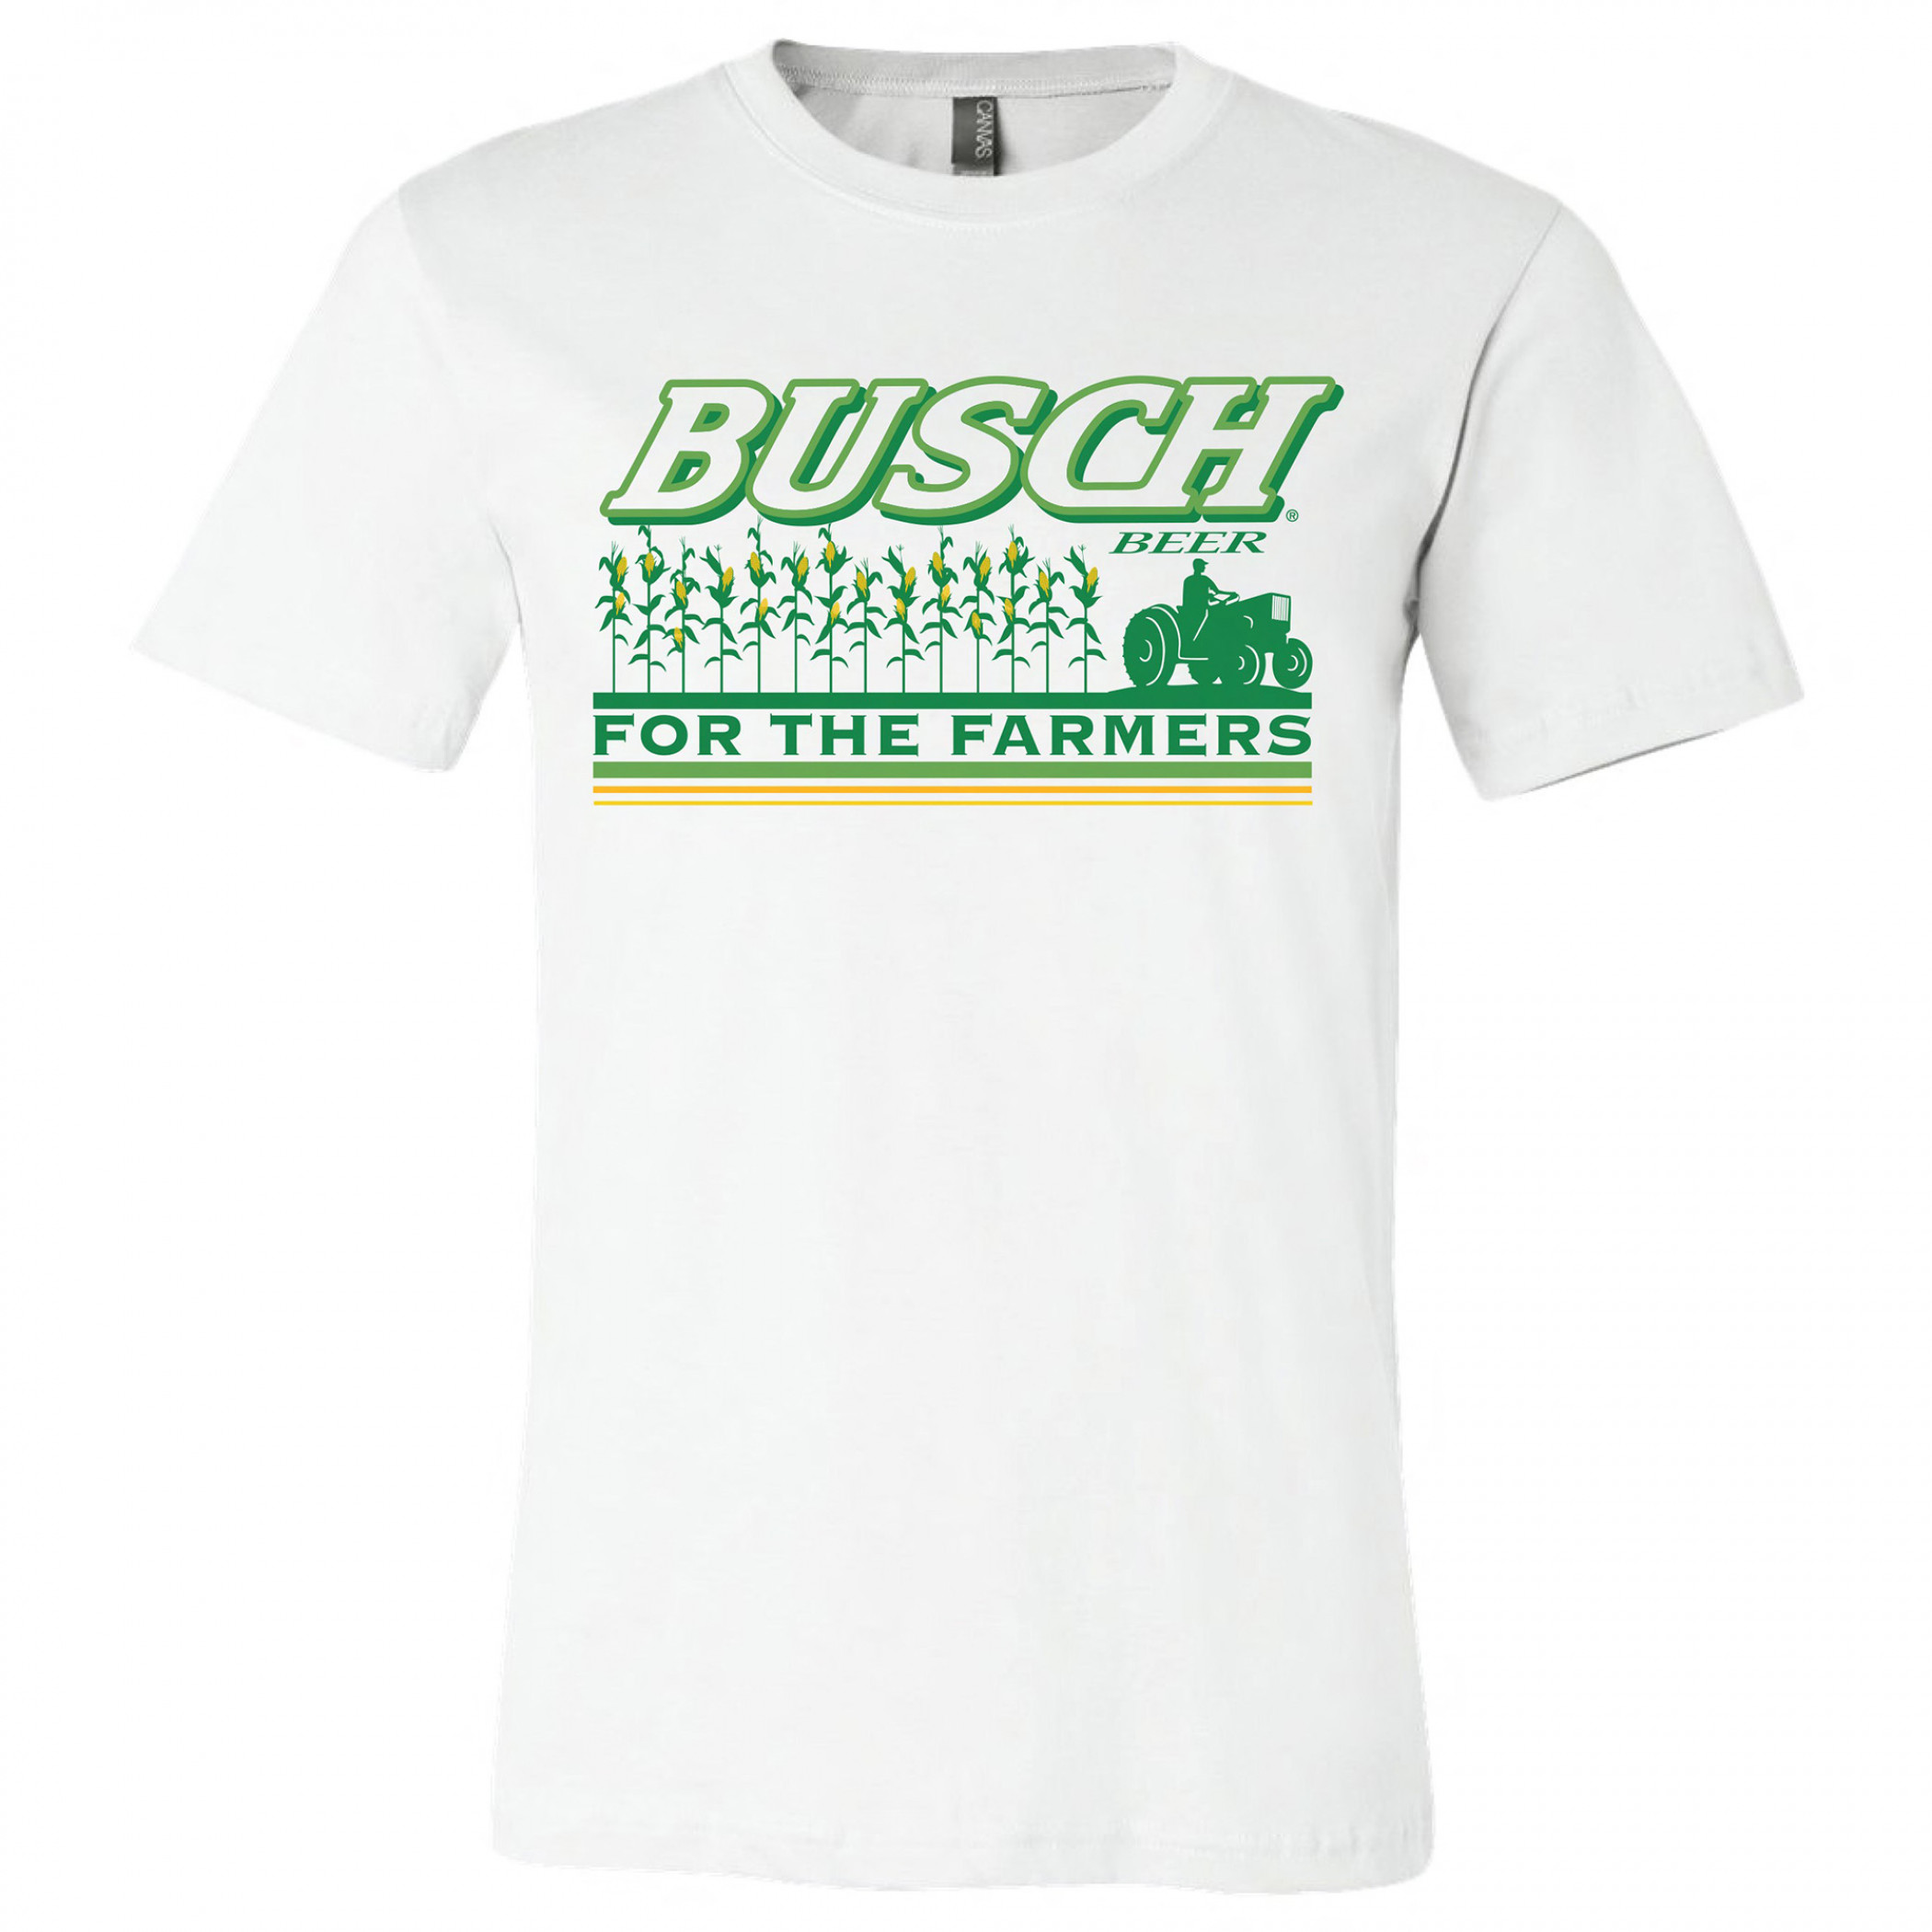 Busch Beer For the Farmers White T-Shirt